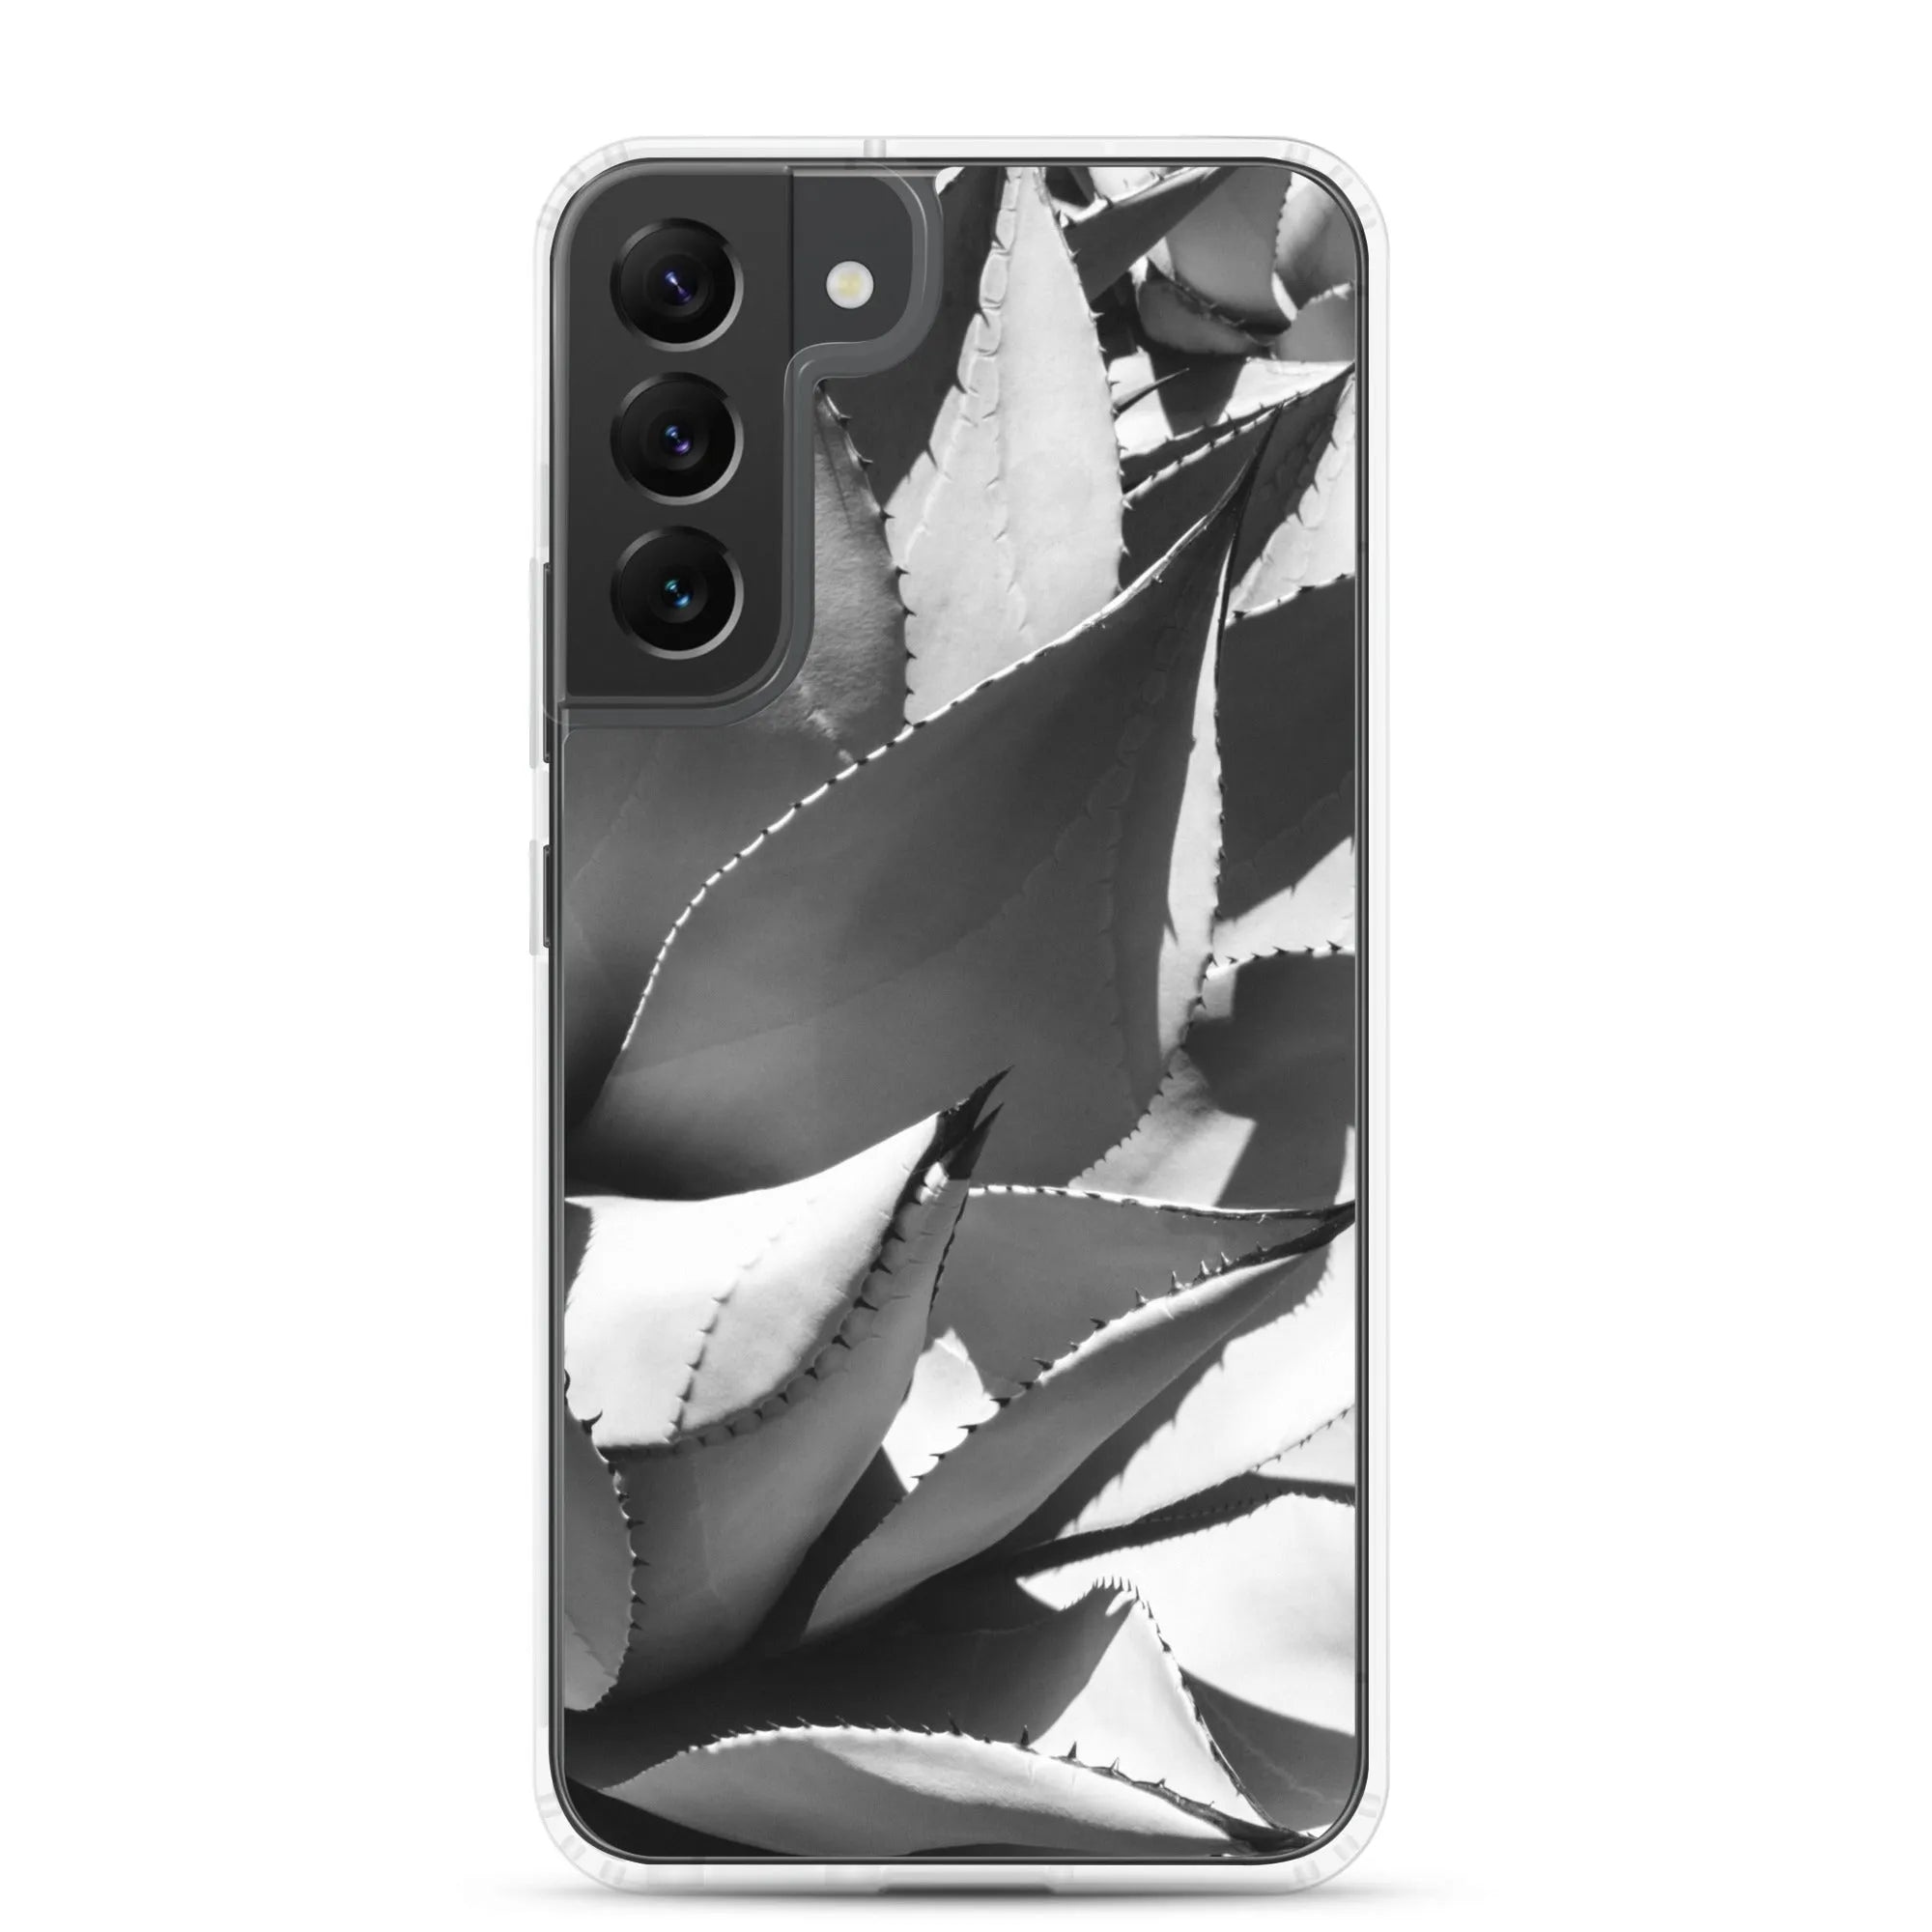 Open Wide Samsung Galaxy Case - Black And White - Samsung Galaxy S22 Plus - Mobile Phone Cases - Aesthetic Art